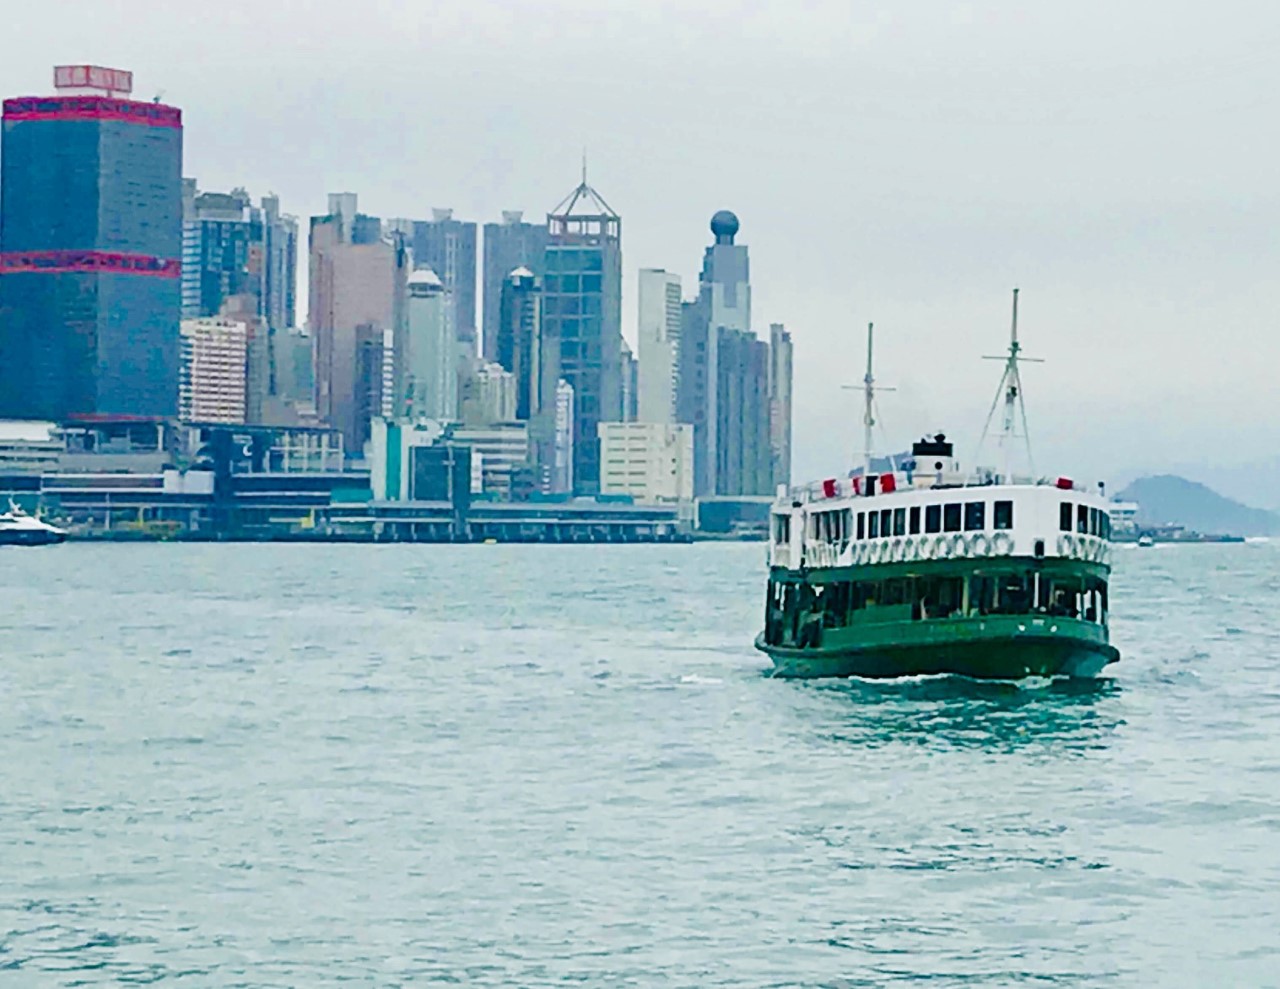 The Star Ferry floats across Hong Kong’s Victoria Harbor. (Photo credit Larry Olmsted)